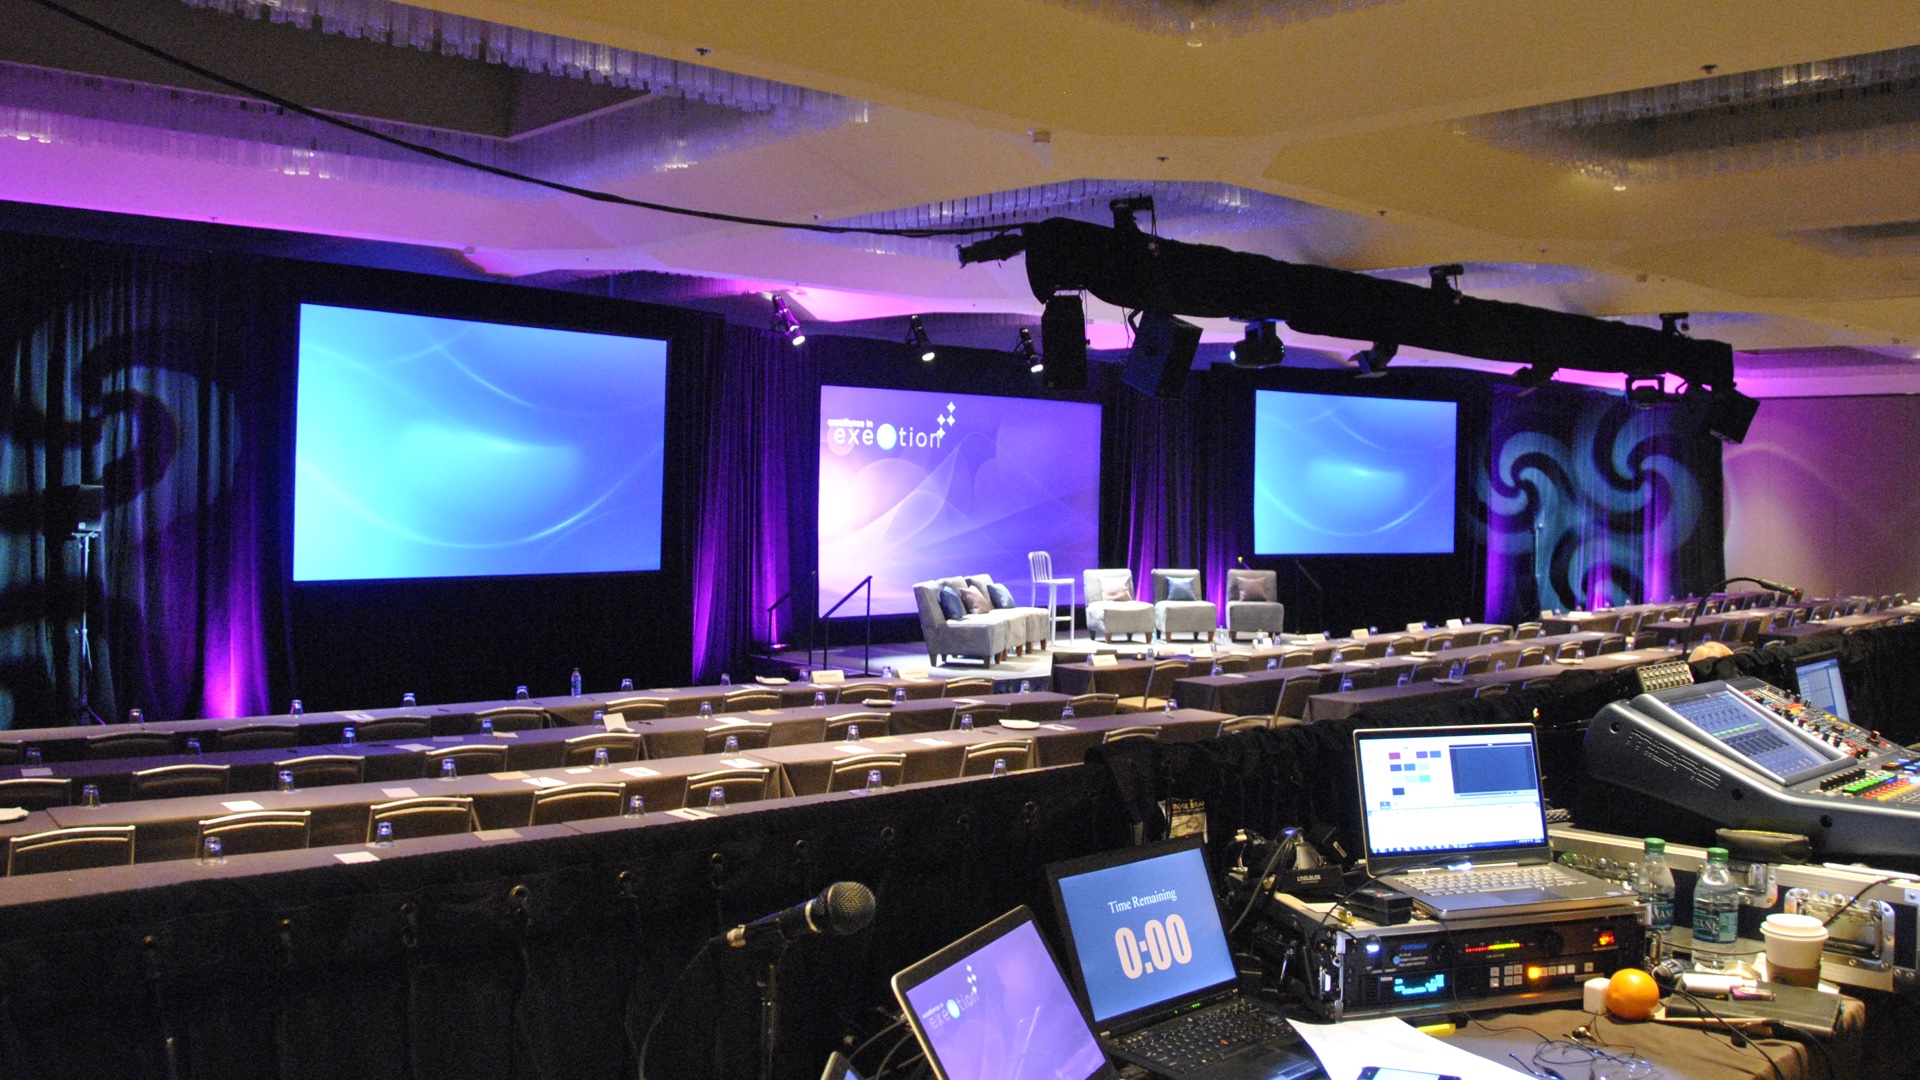  SONUS Provided Audio Video Lighting and Rigging Rental for corporate event